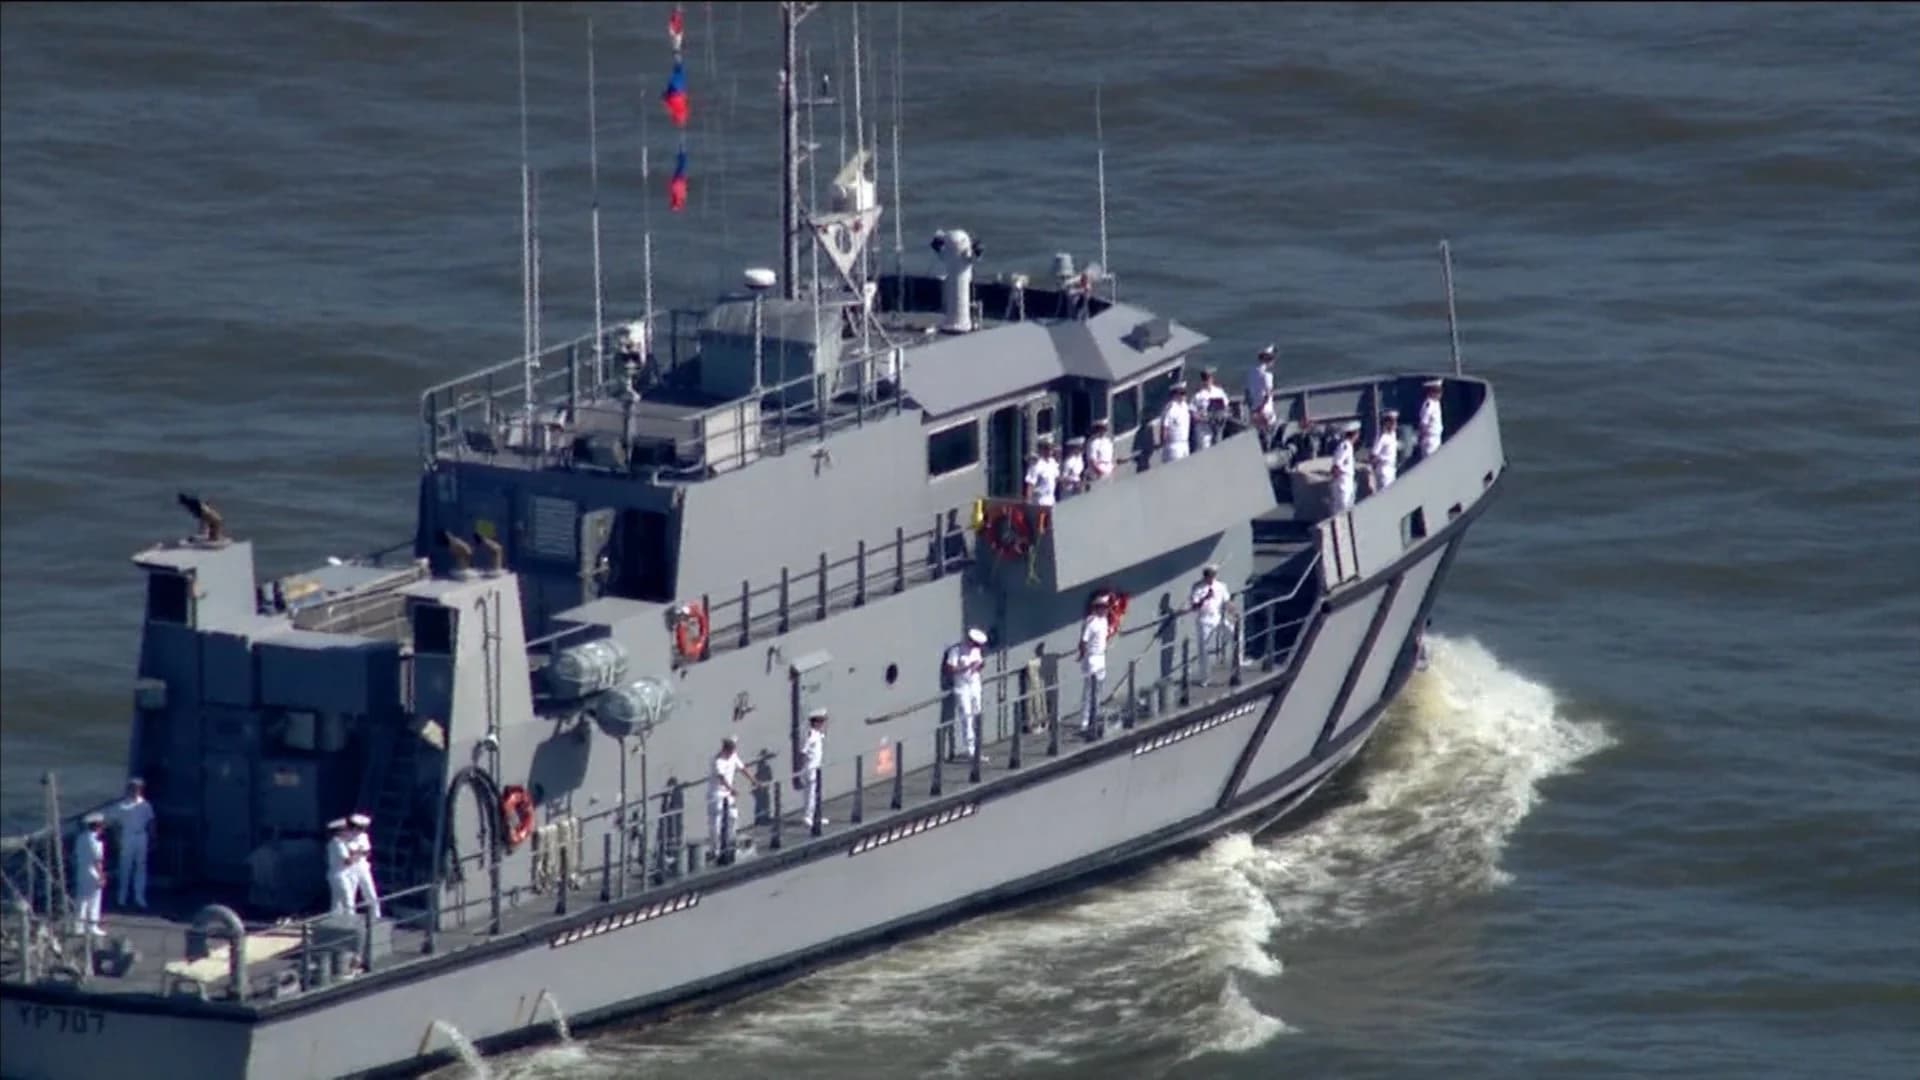 WATCH: Fleet Week 2019 underway with annual 'parade of ships'